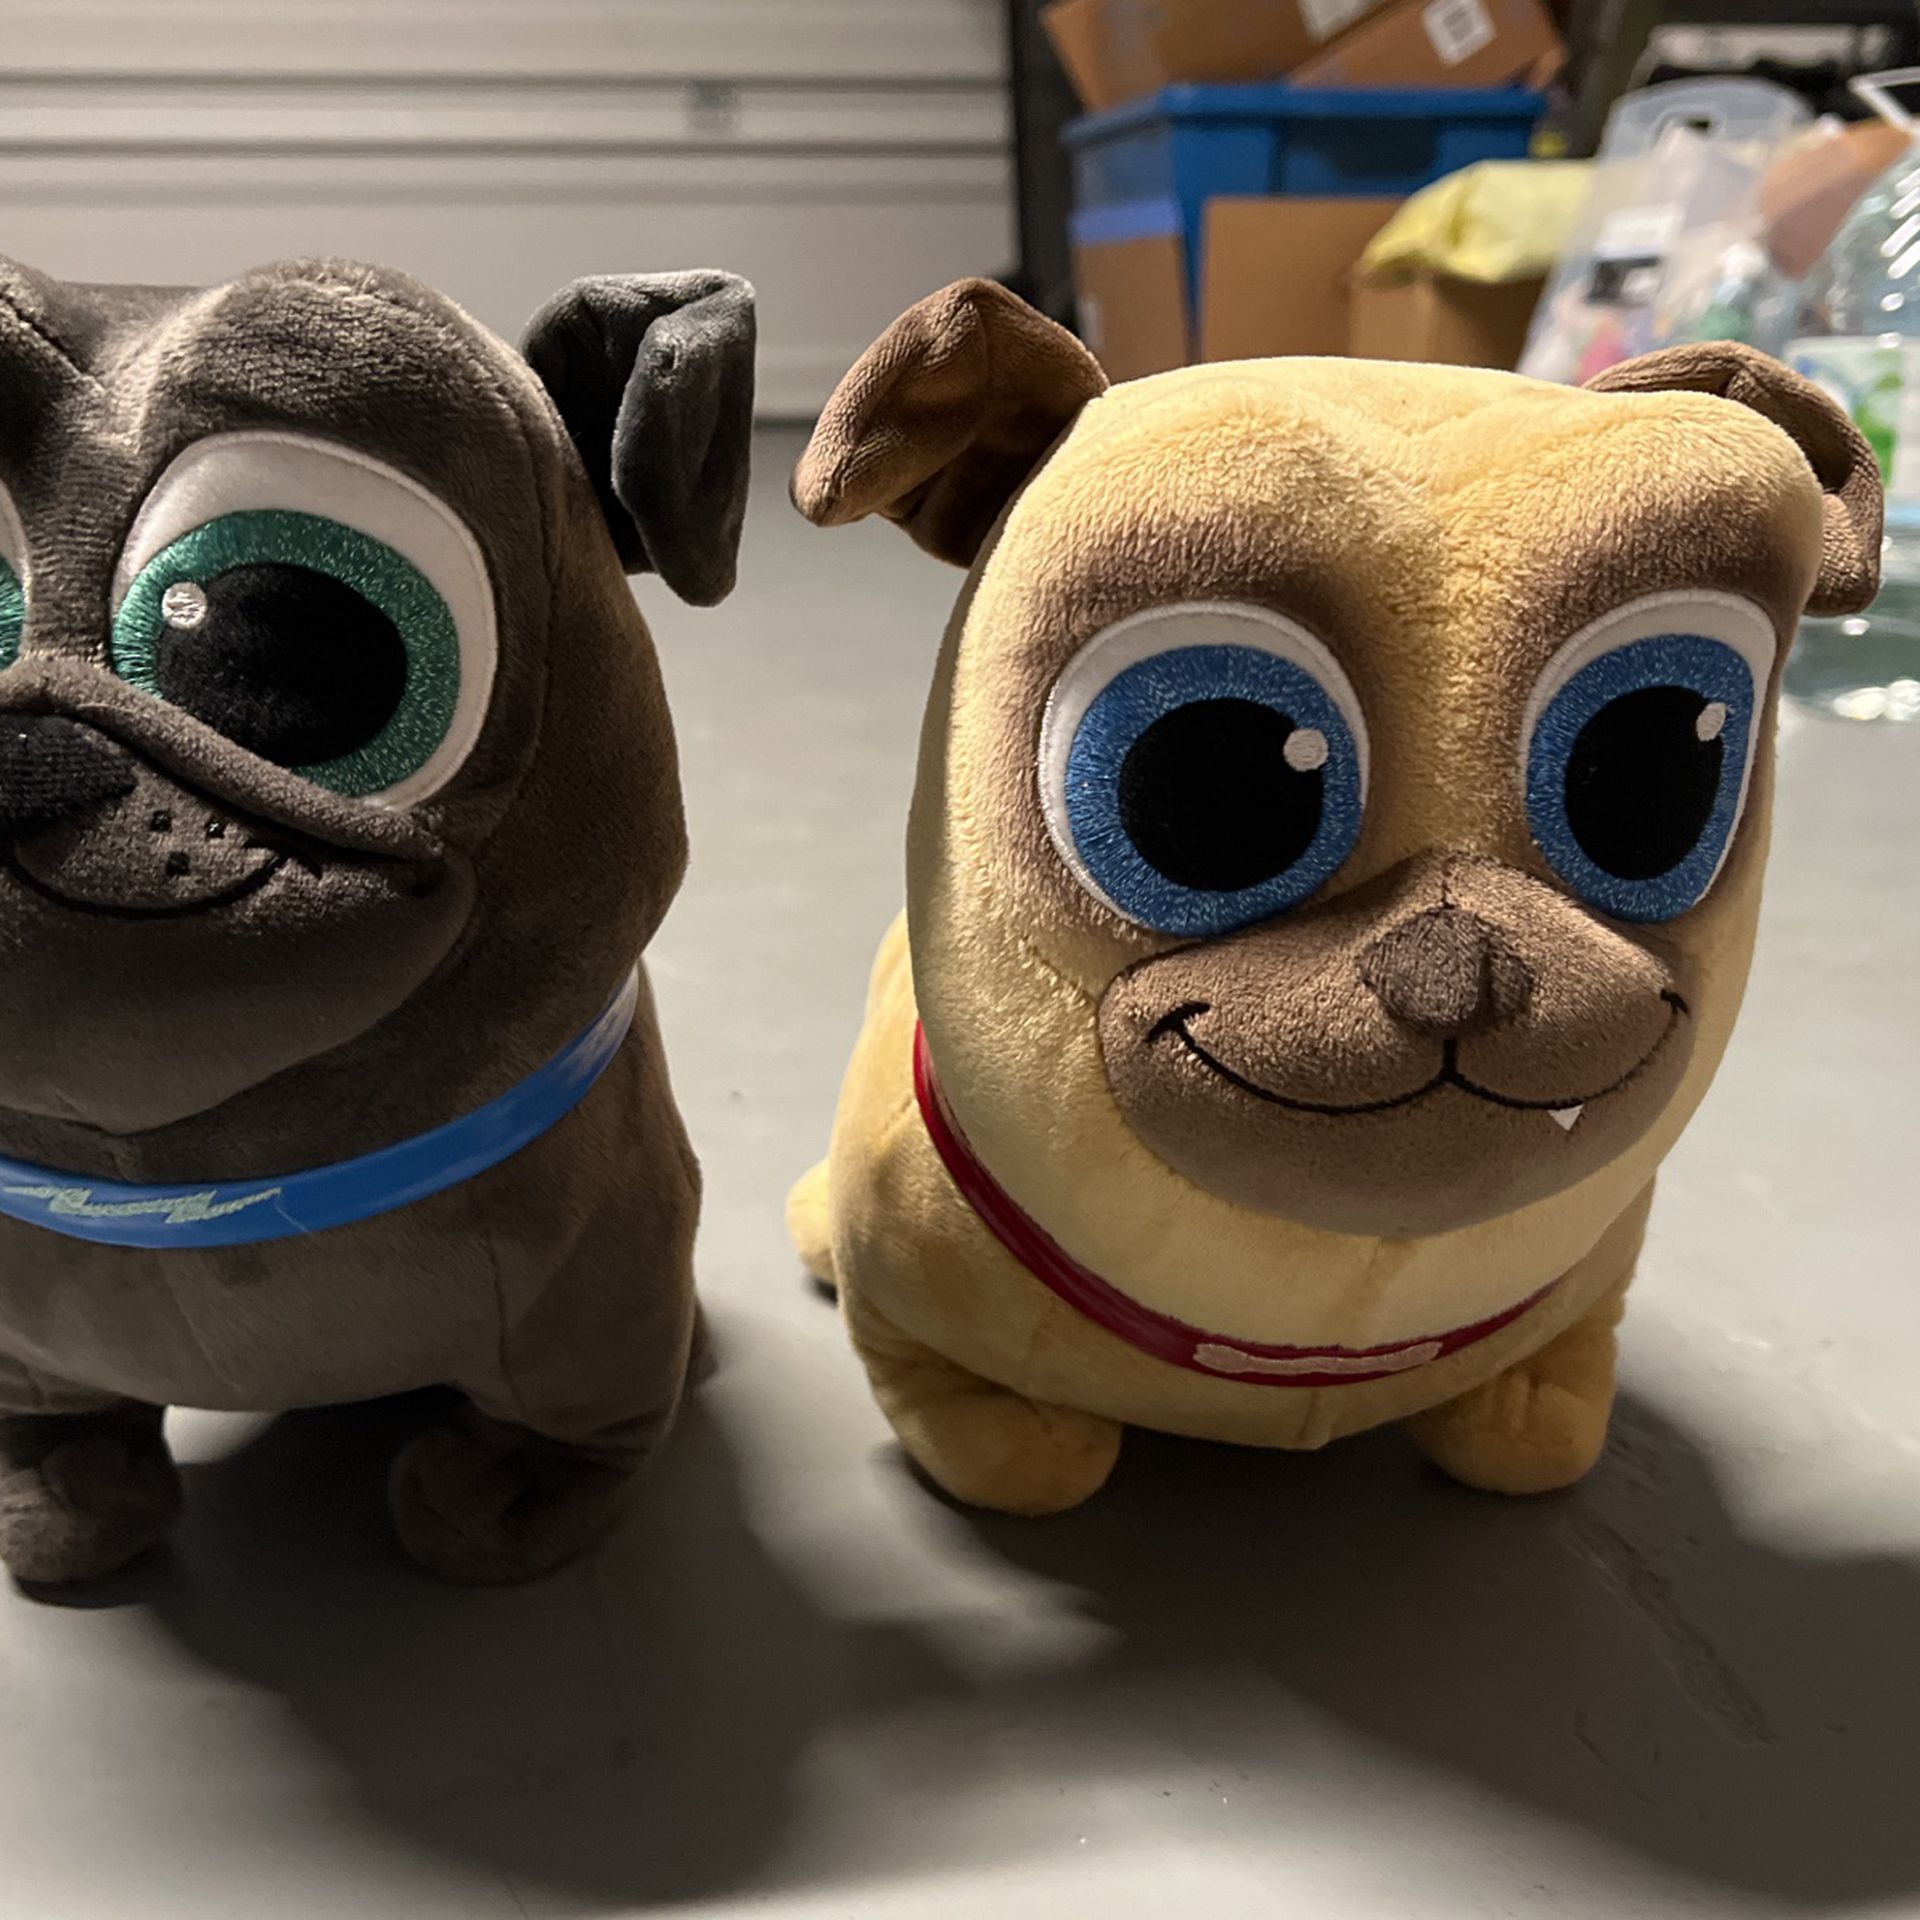 Puppy Dog Pals:Bingo And Rolly